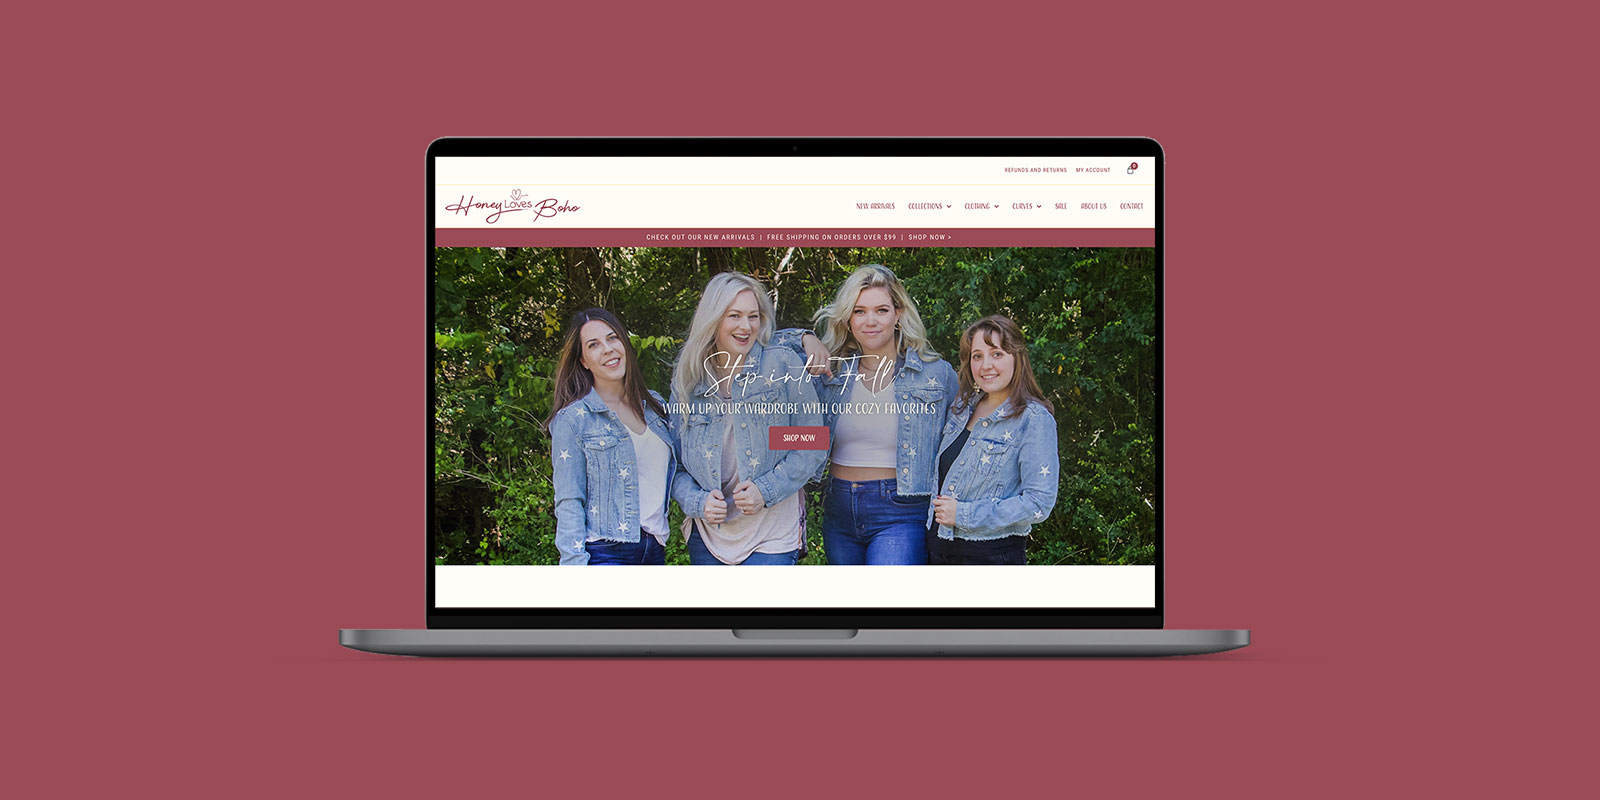 A silver laptop with the Honey Loves Boho website main page pulled up showing four women in denim jackets.